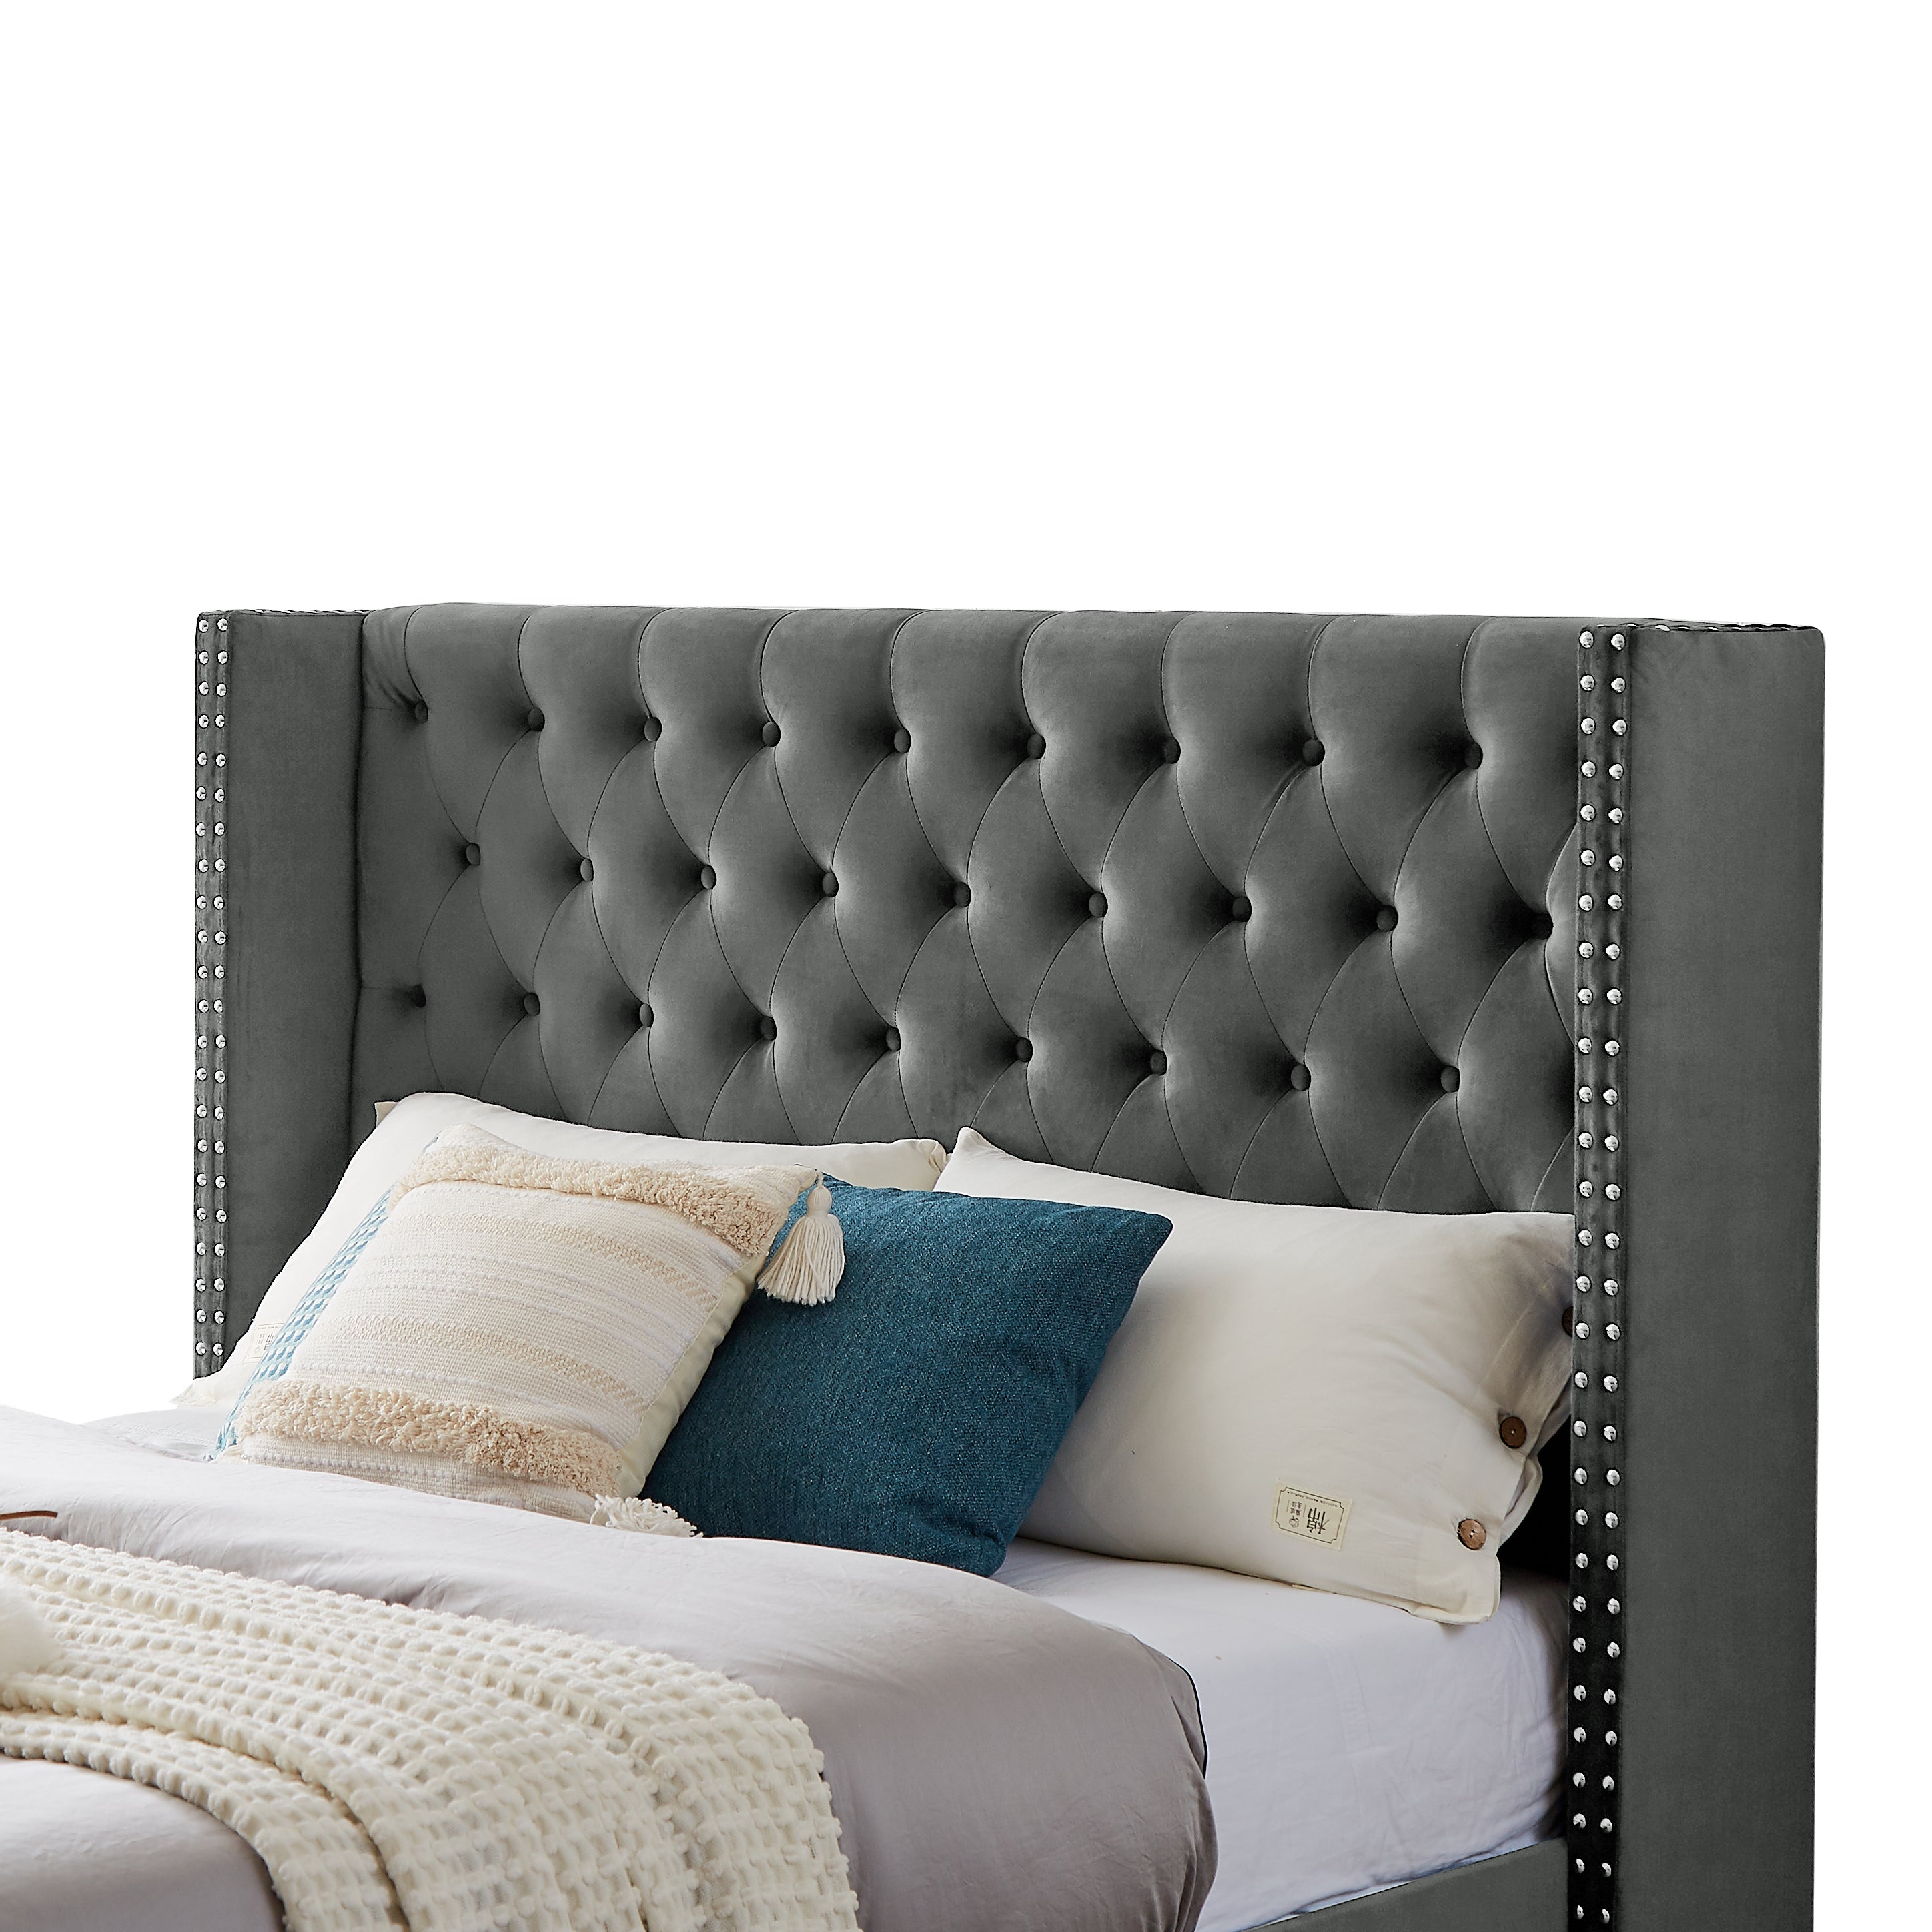 Queen Headboard Bed with Nightstand and Wooden Slats By: Alabama Beds